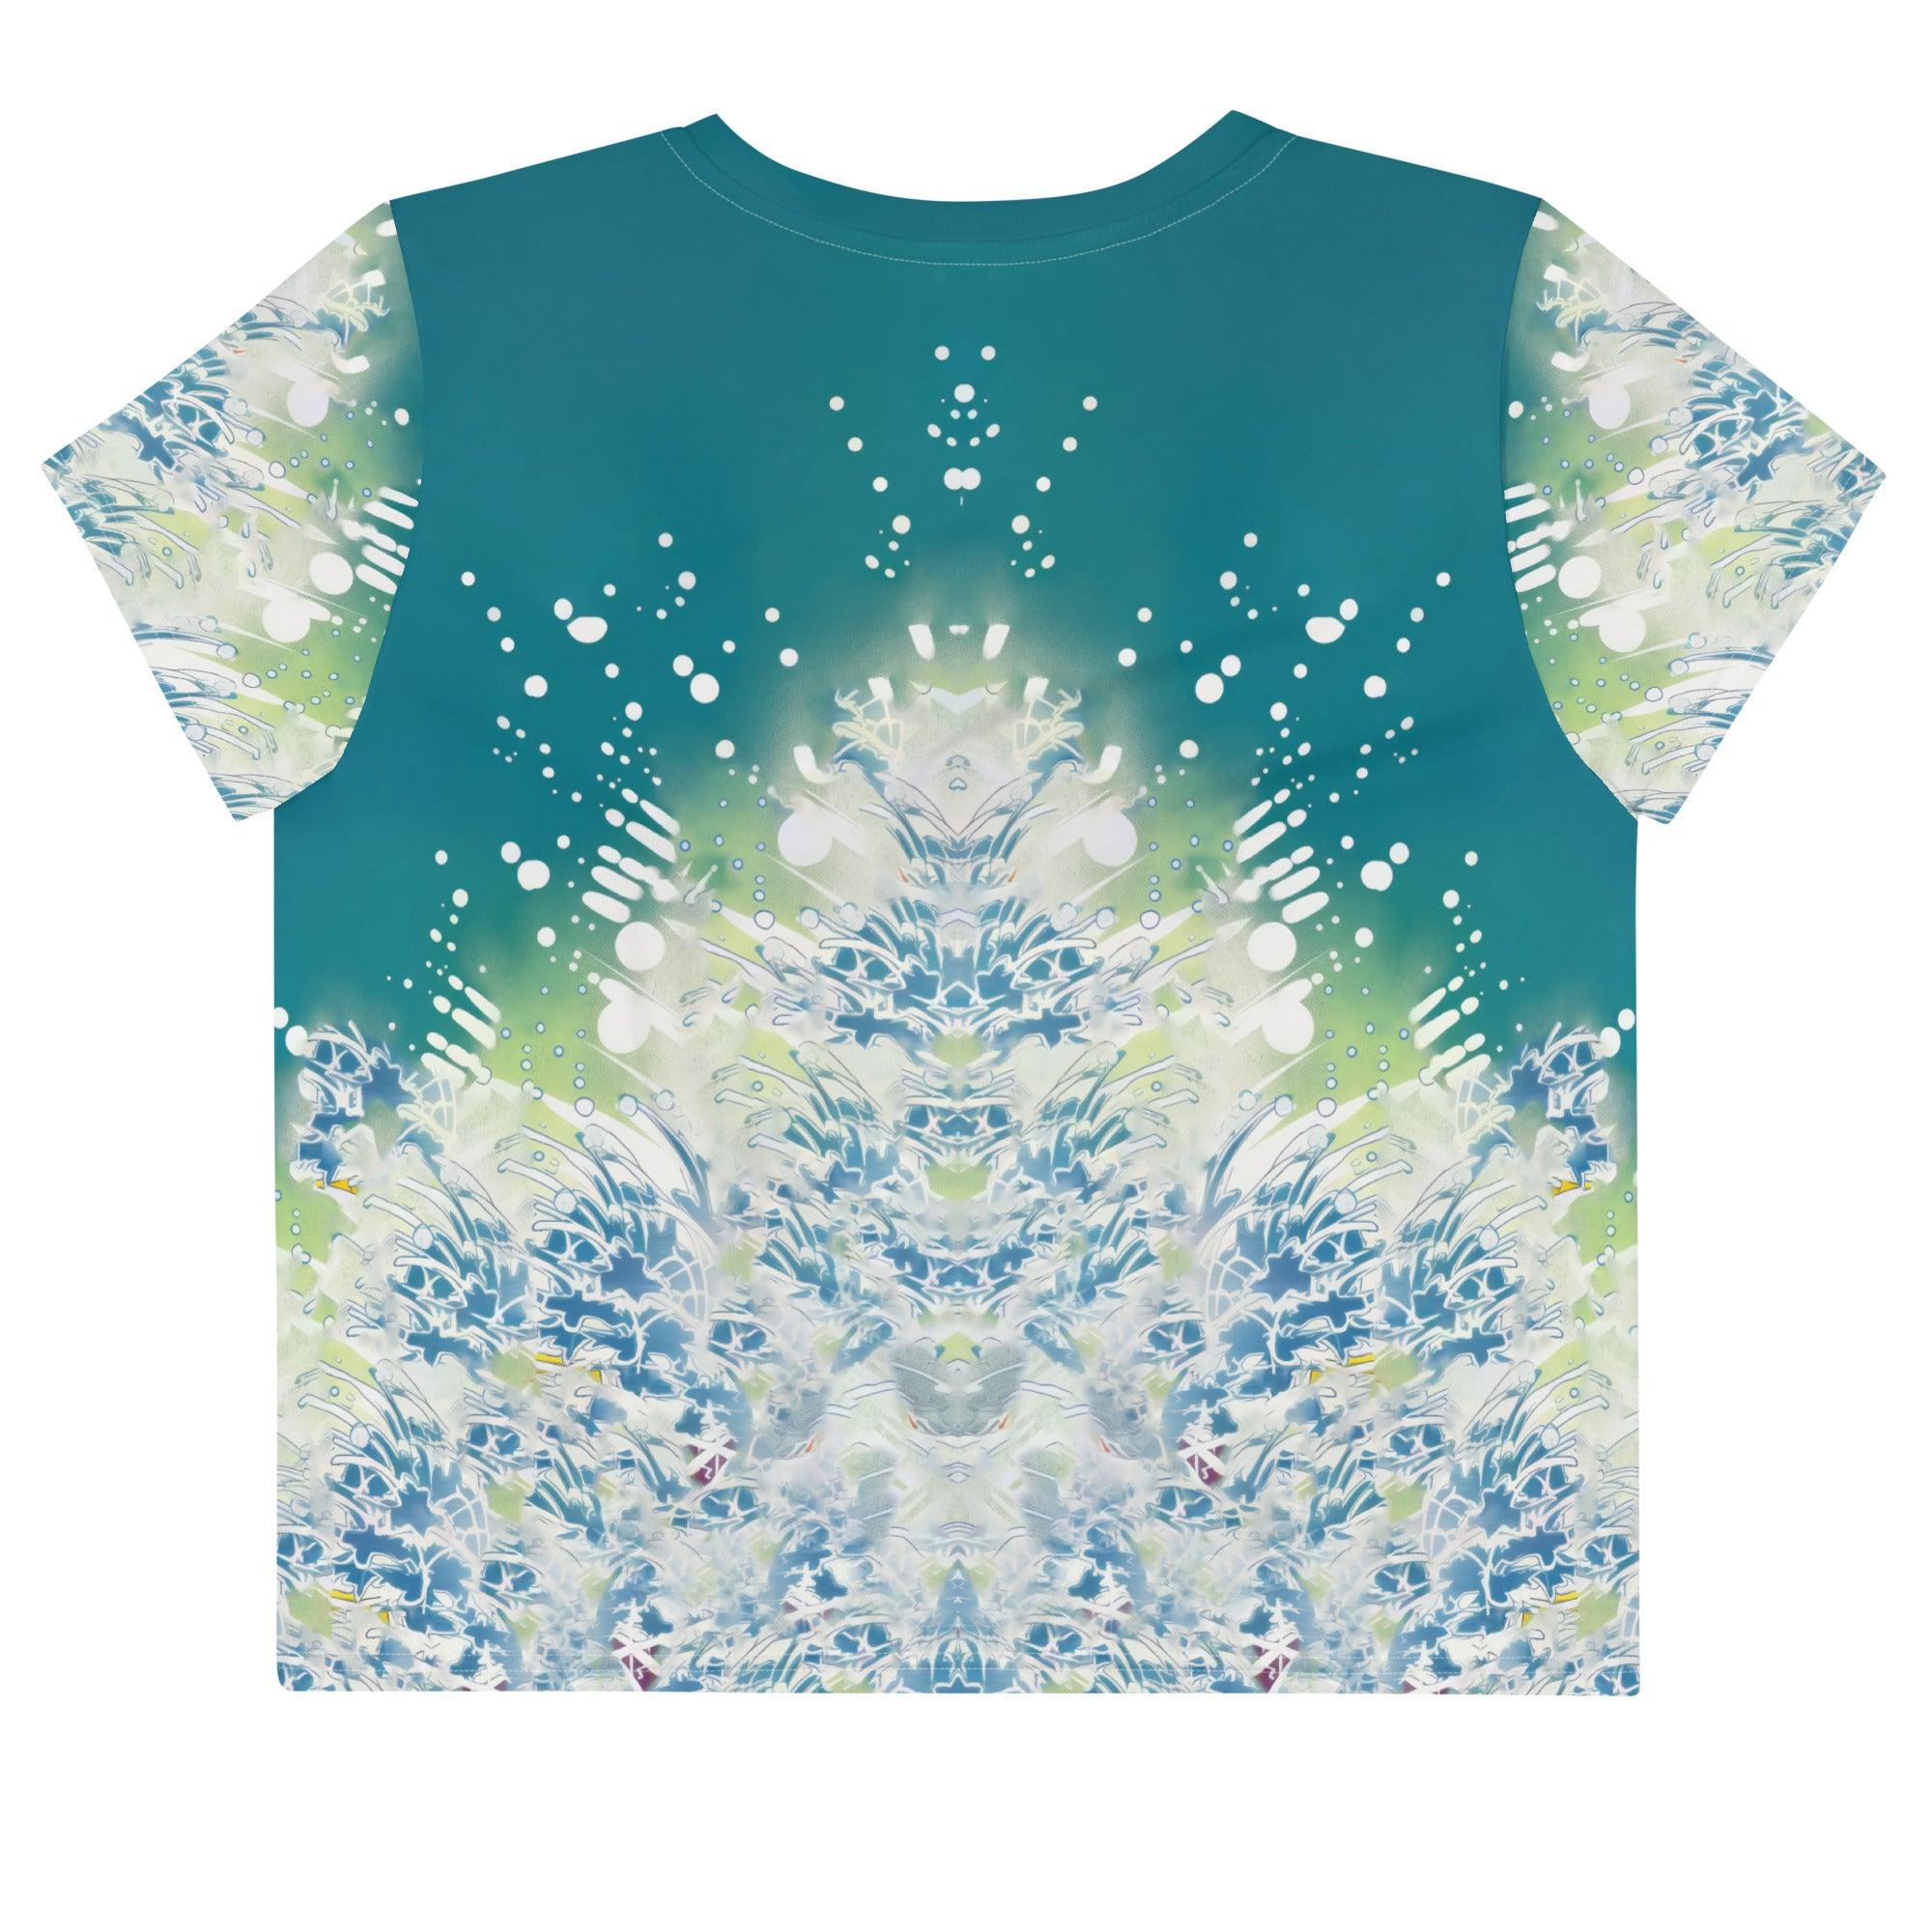 Surfing 1 51 All-Over Print Crop Tee - Beyond T-shirts